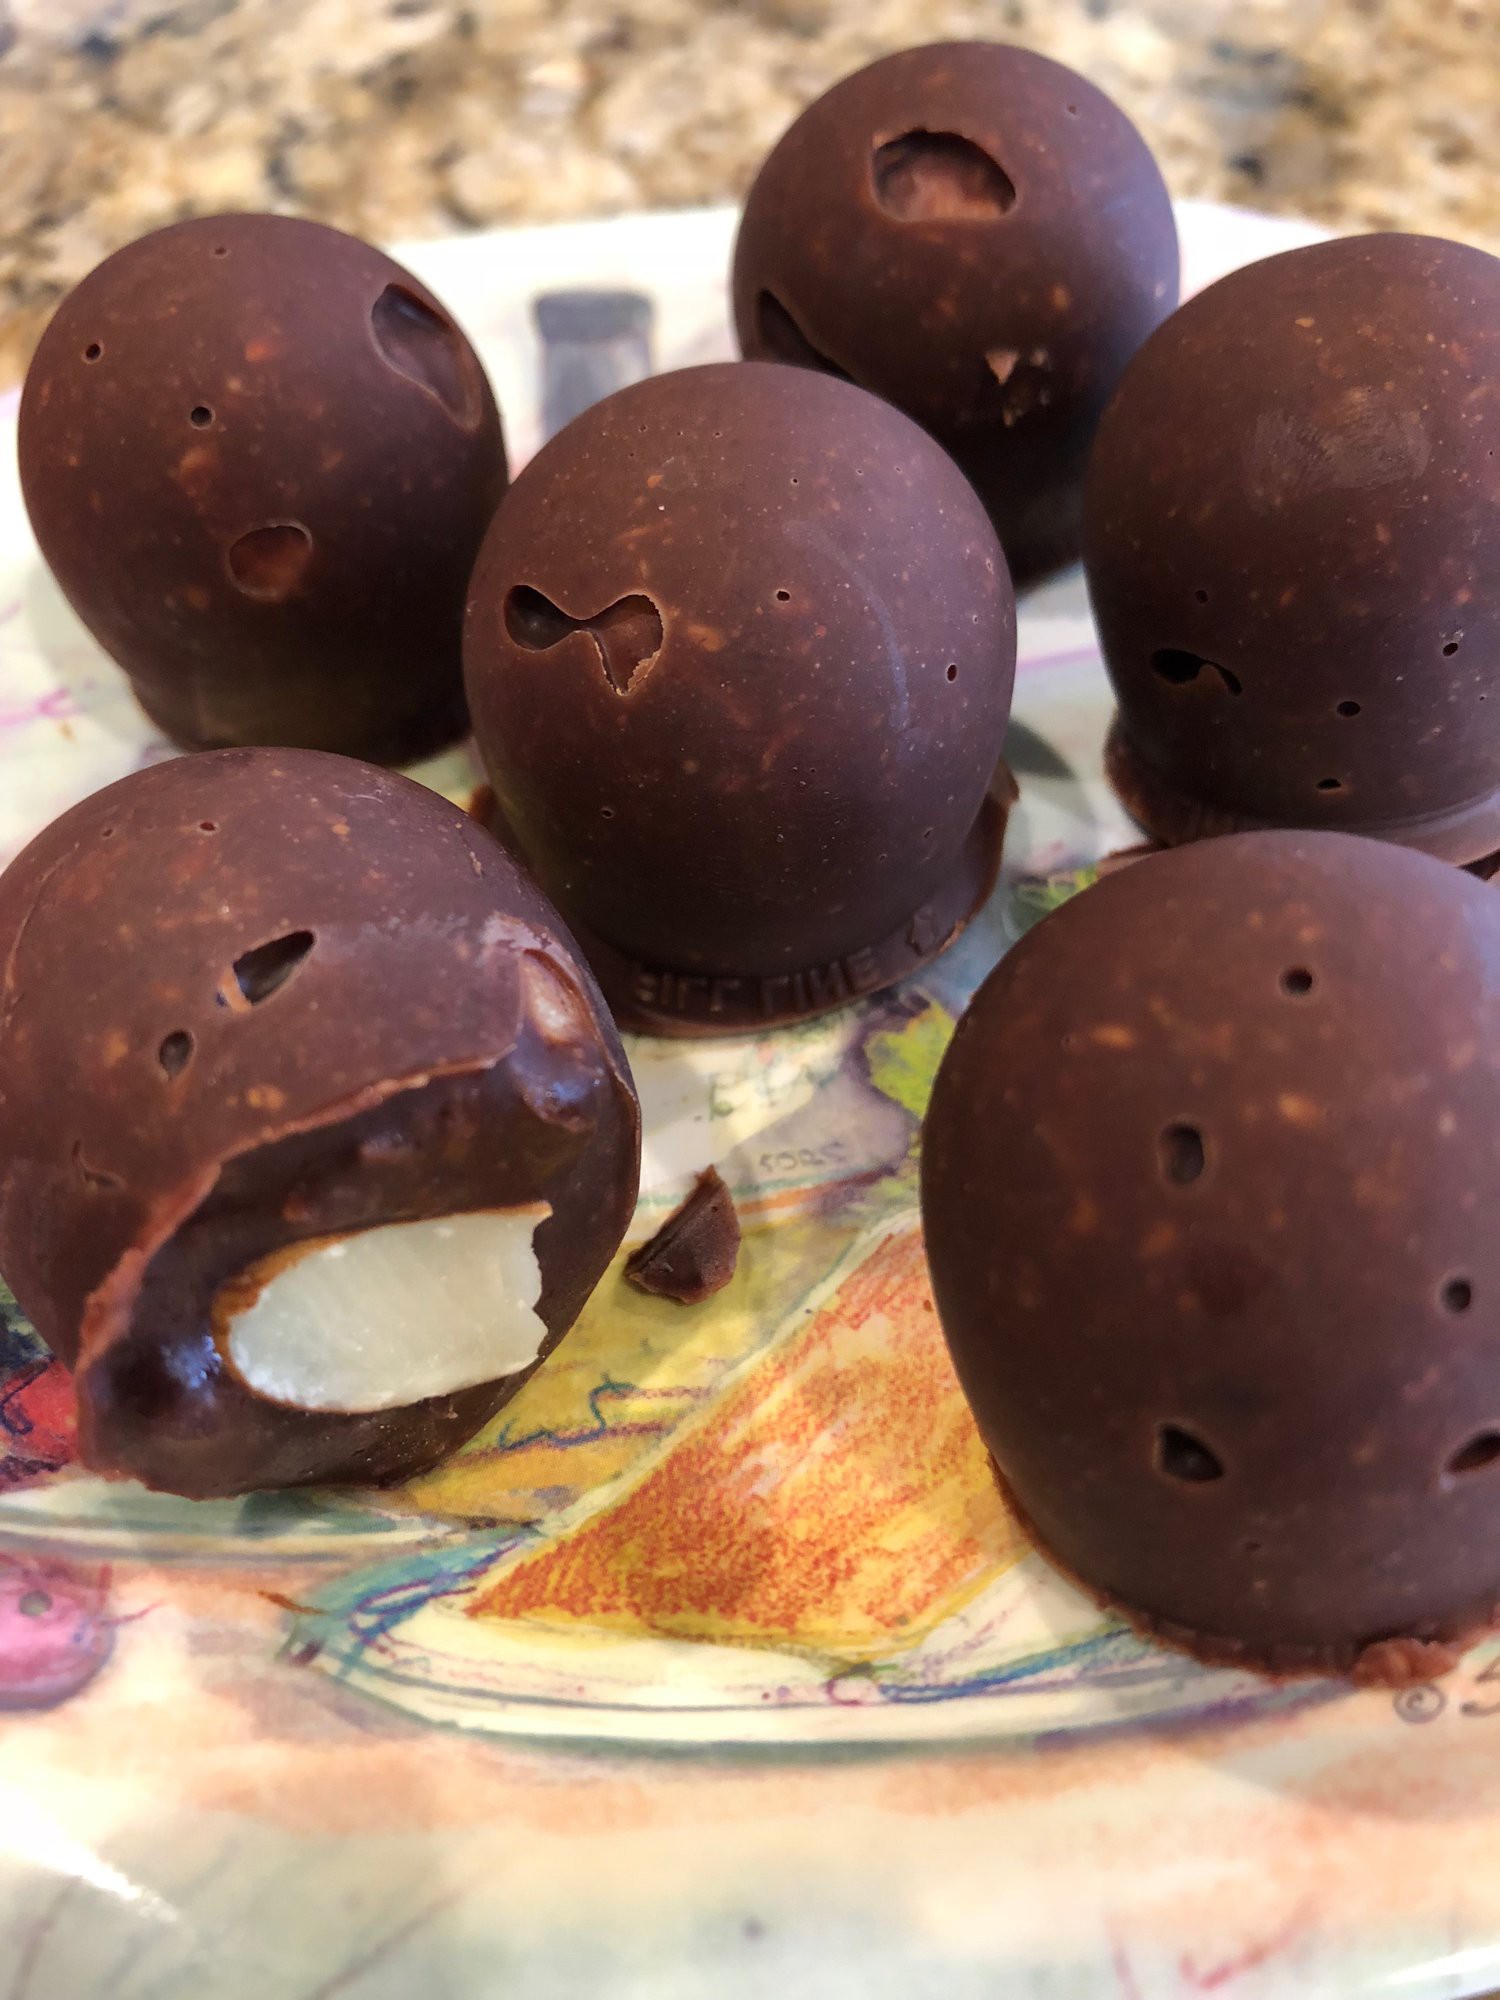 Cacao Fat Bombs | Stillbluewater's keto/lowcarb collection | Copy Me That